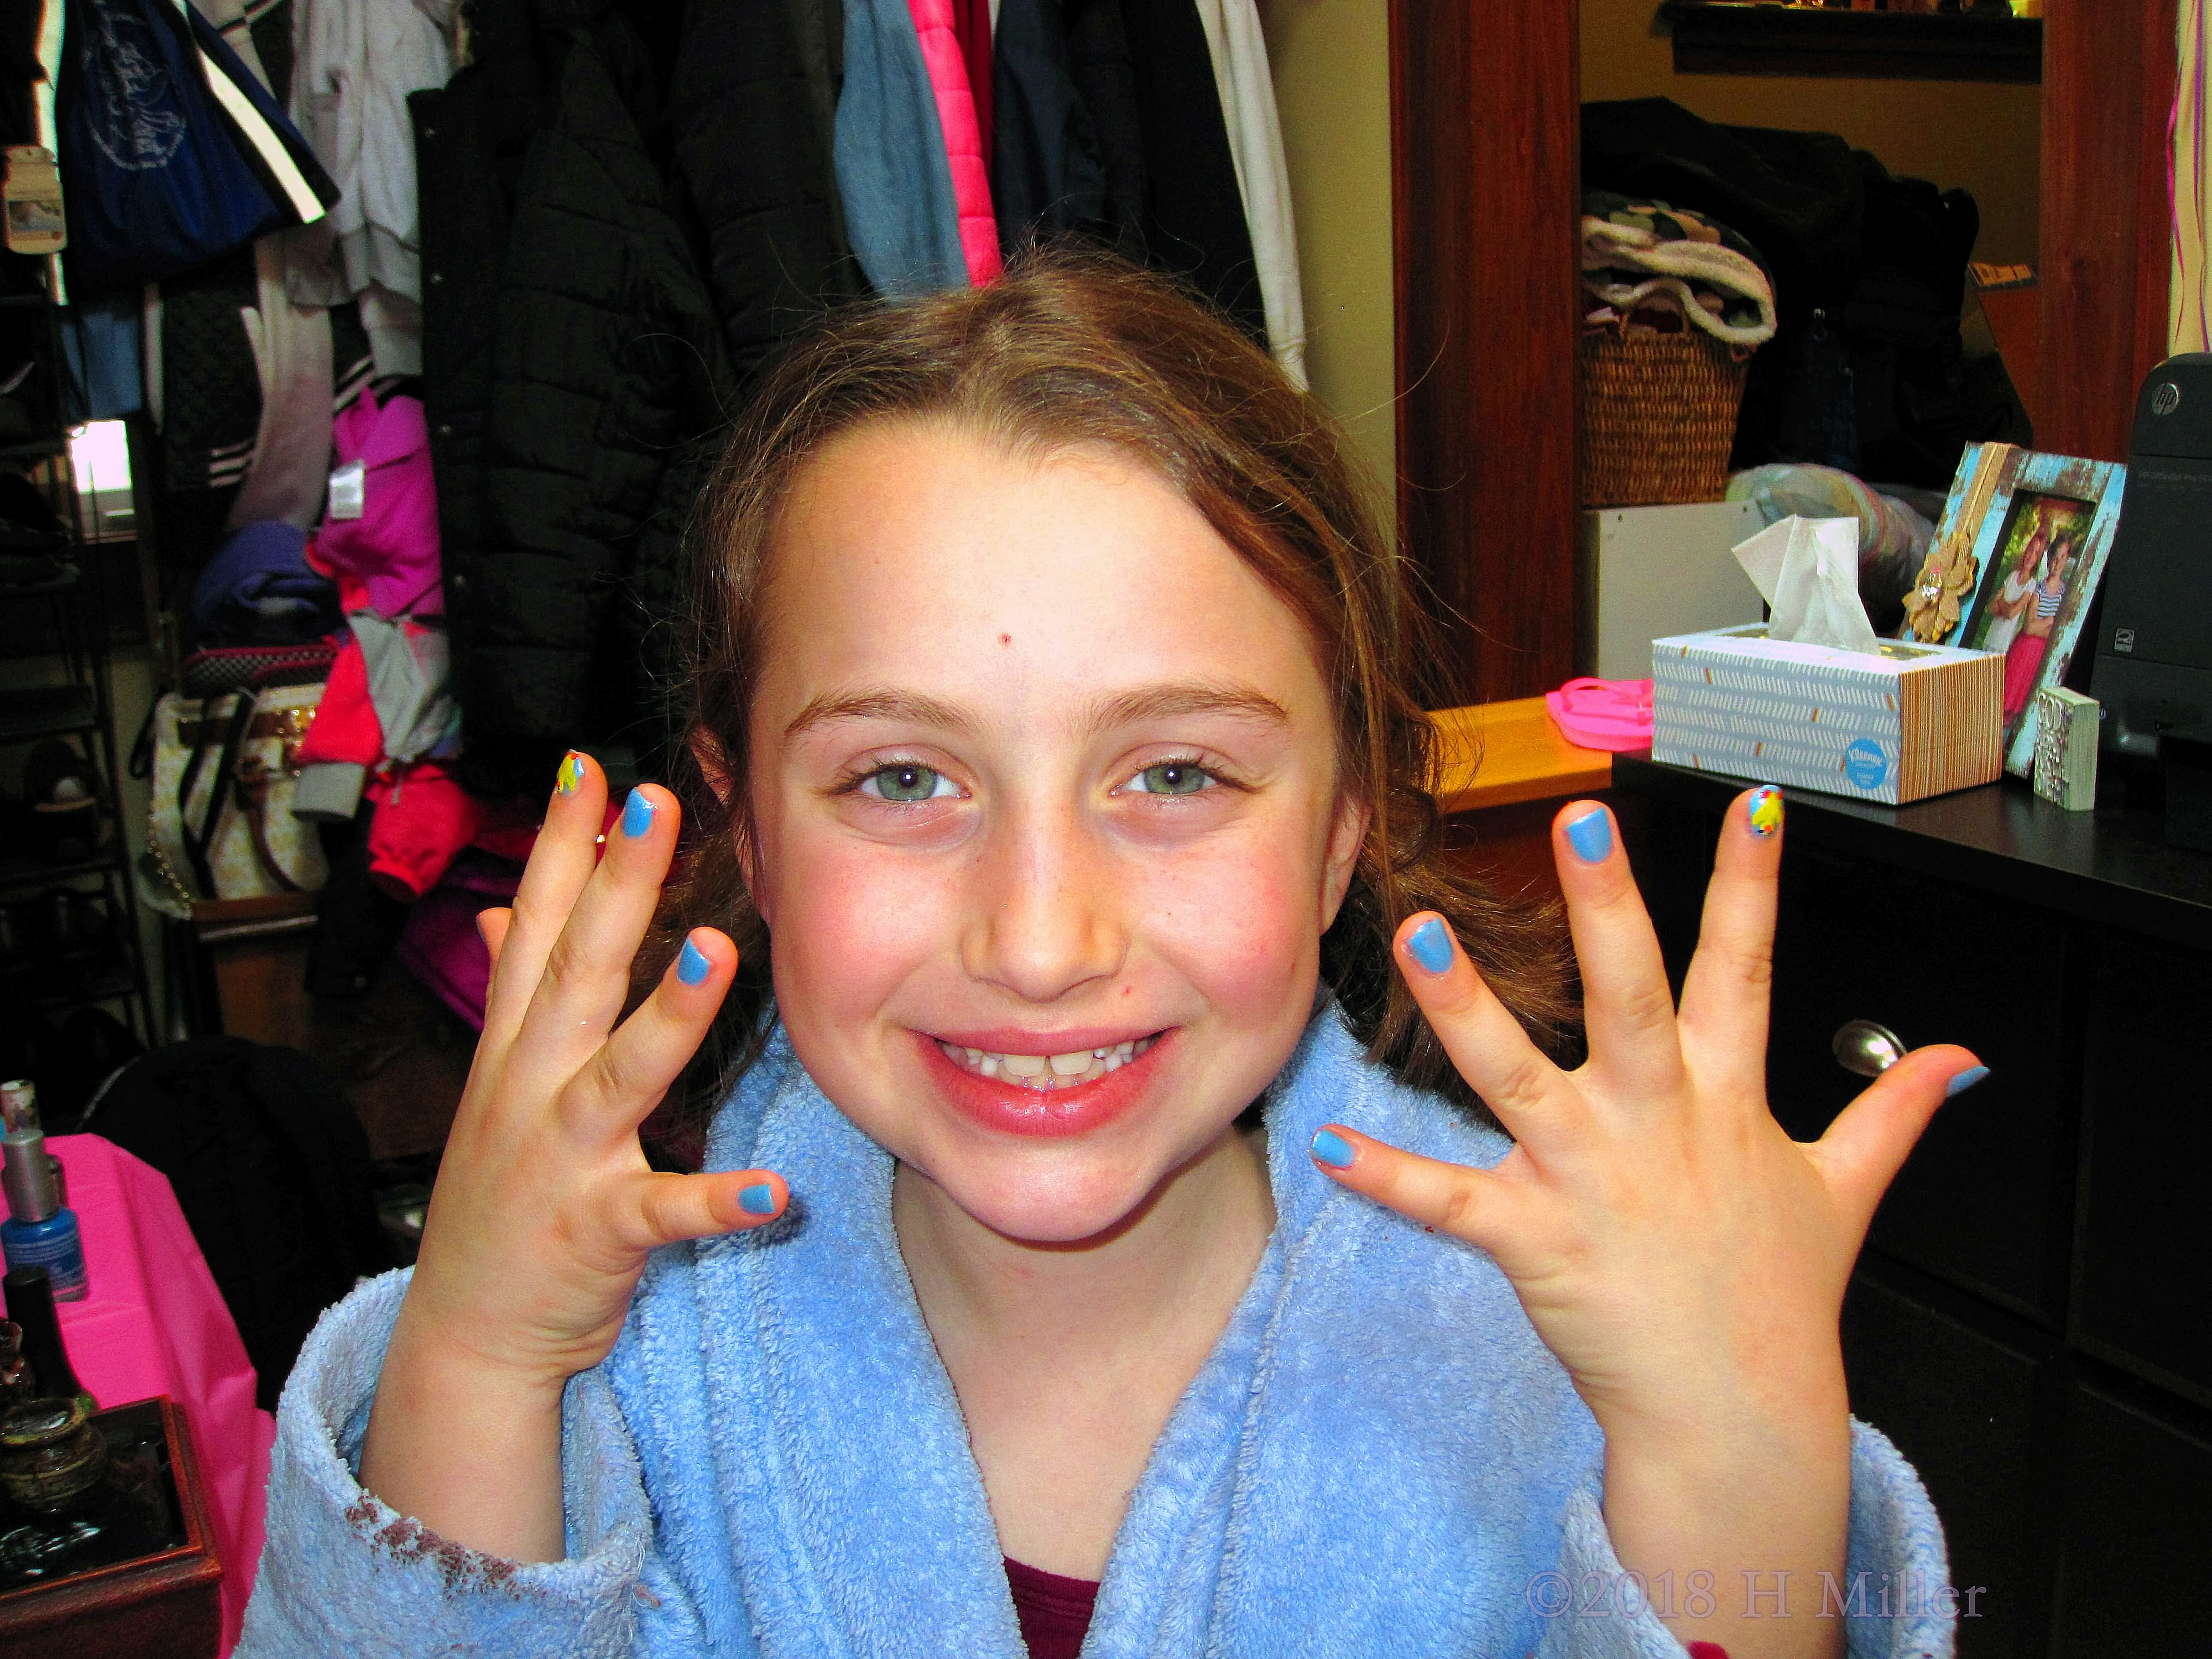 Blue Spa Robe And An Awesome Kids Manicure At The Spa Party For Kids! 4